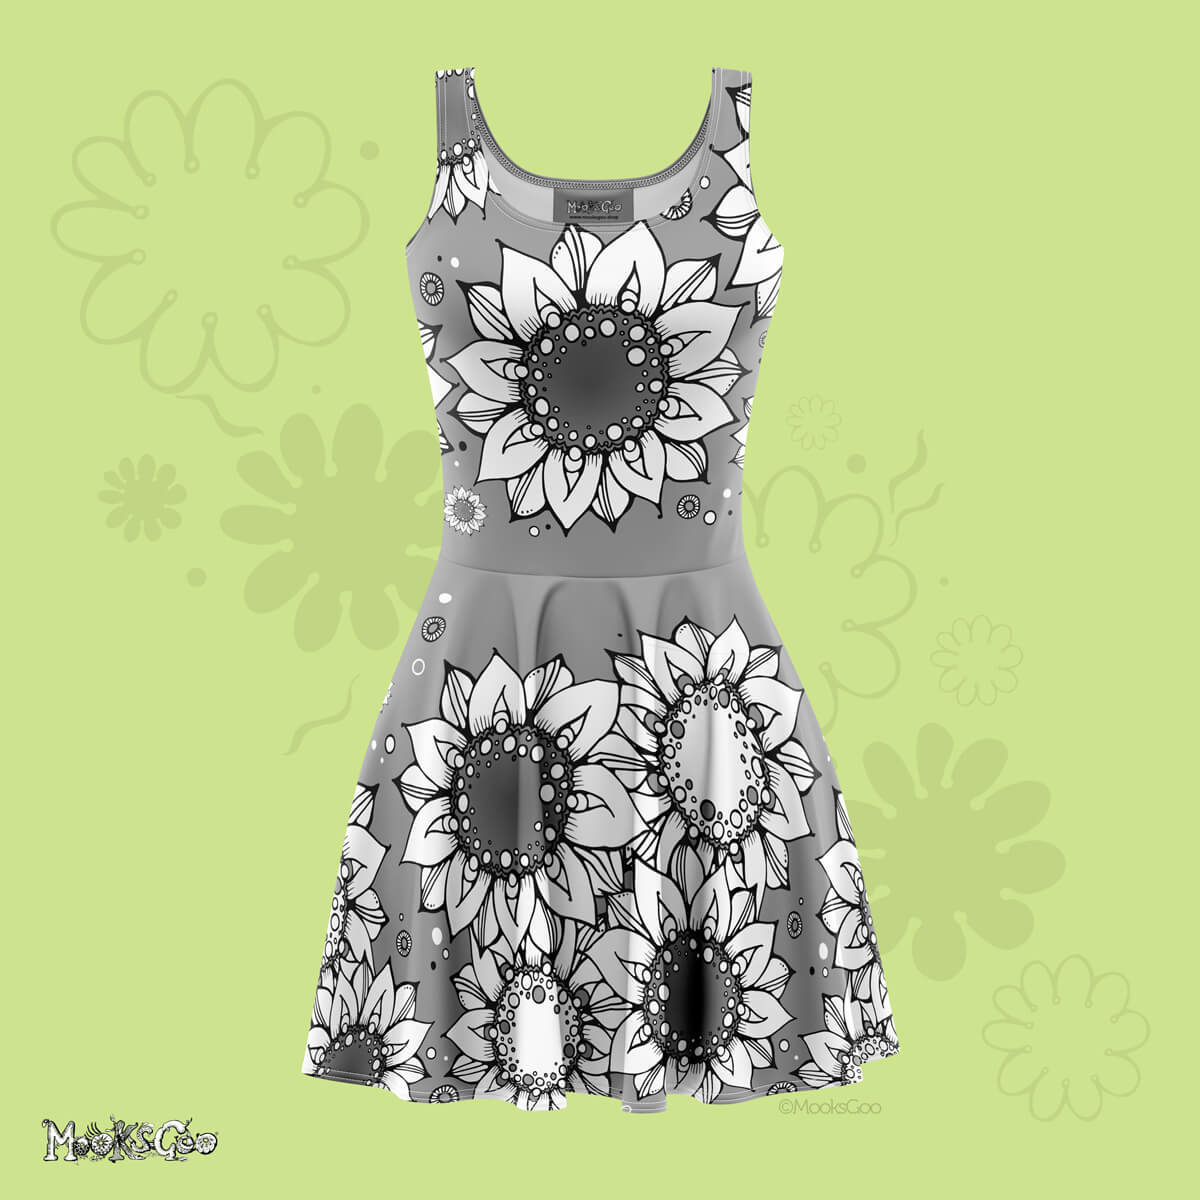 A grey Quirky and fun women's floaty light skater dress with hand drawn illustrated black and white sunflowers, dots and wheels, designed by MooksGoo